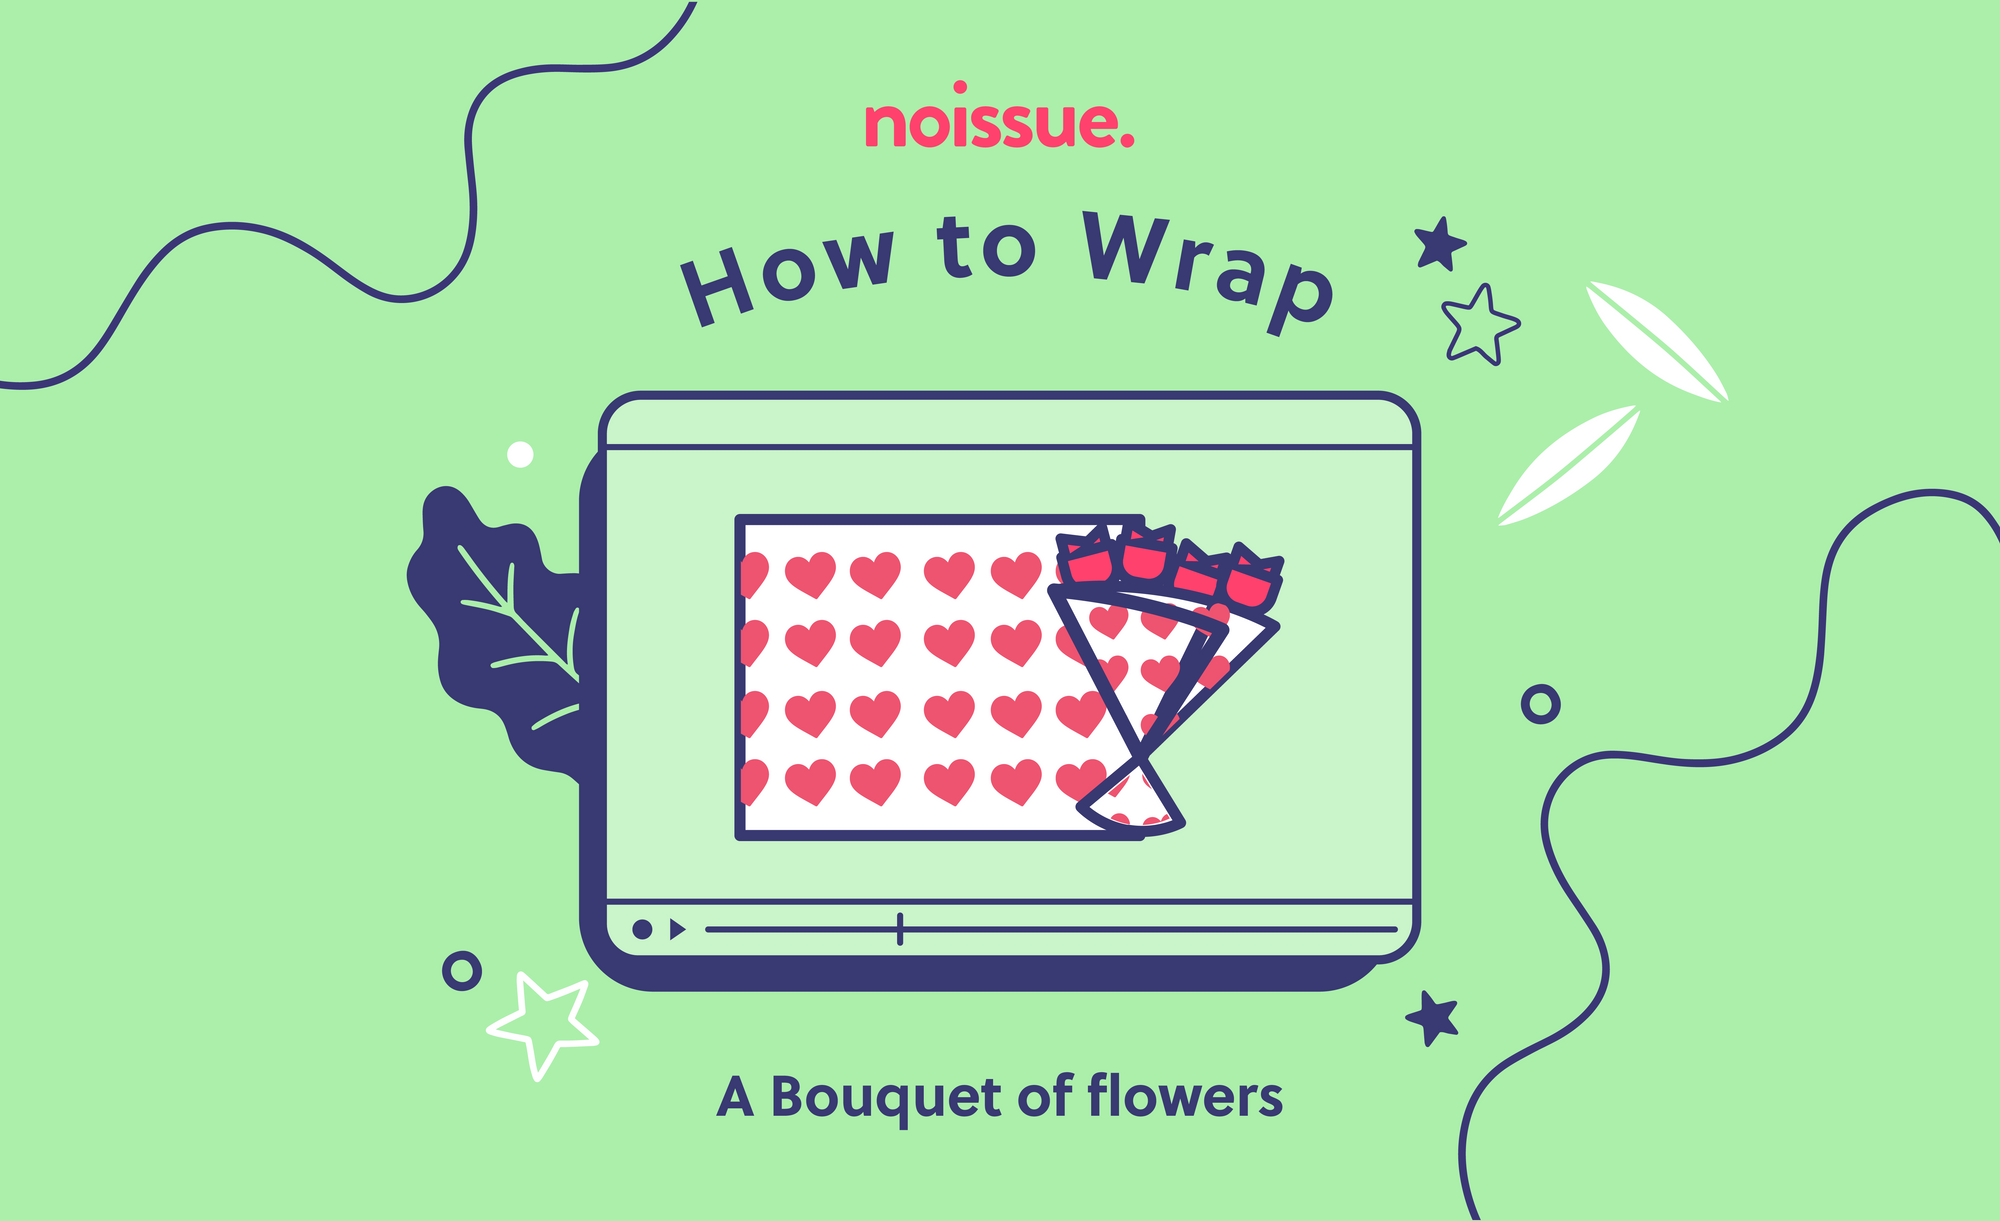 How to Wrap: A Bouquet of Flowers